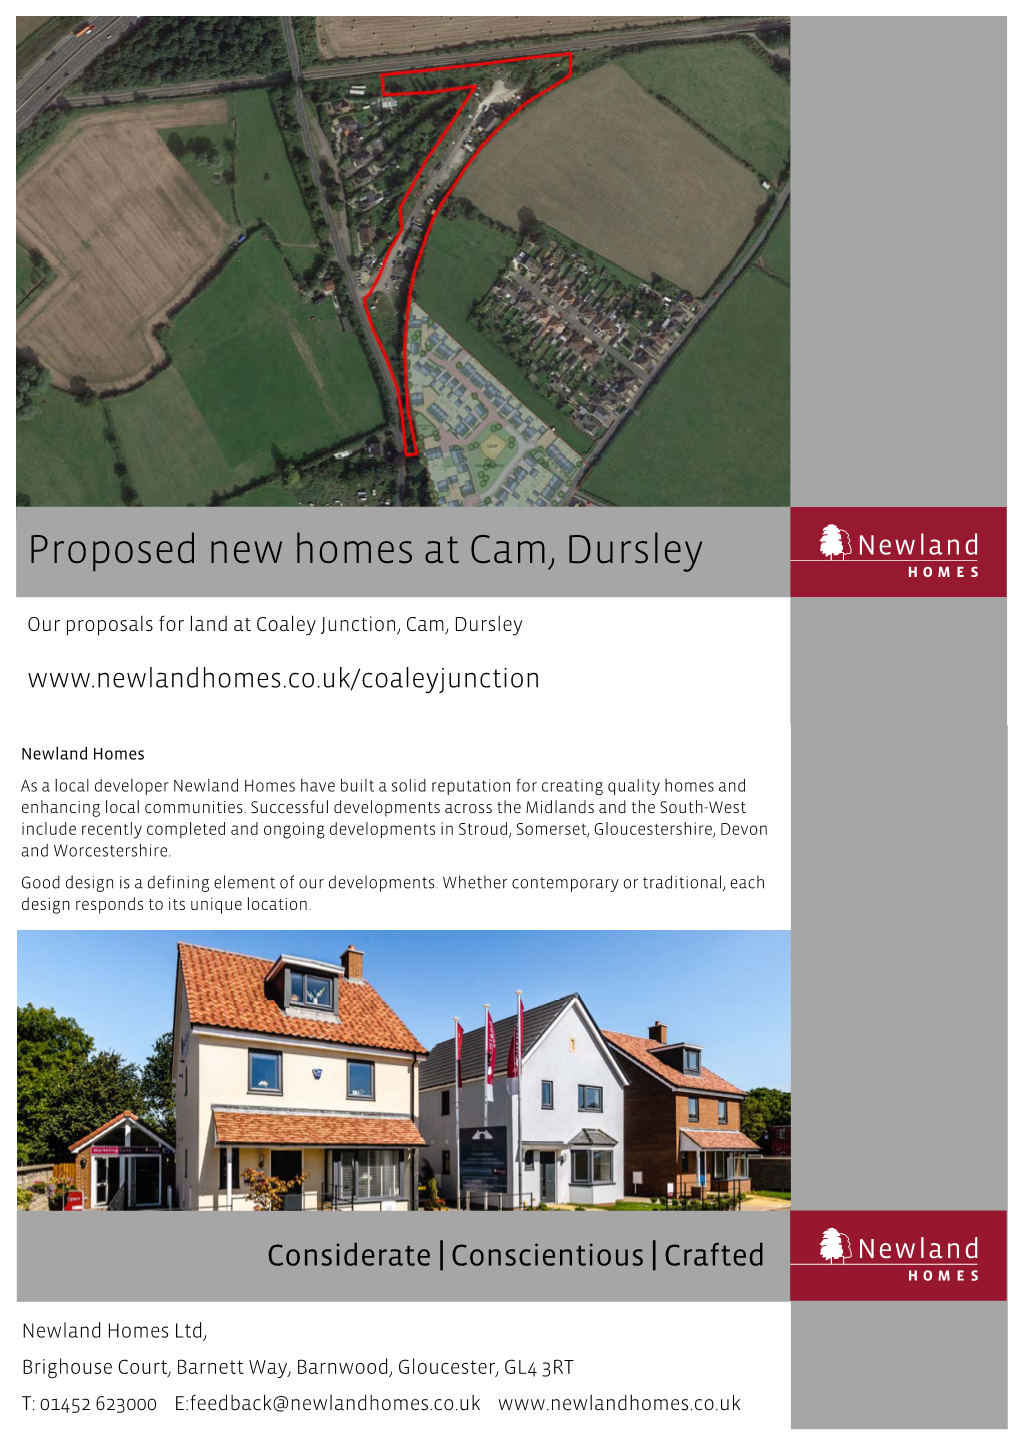 Proposed New Homes at Cam, Dursley